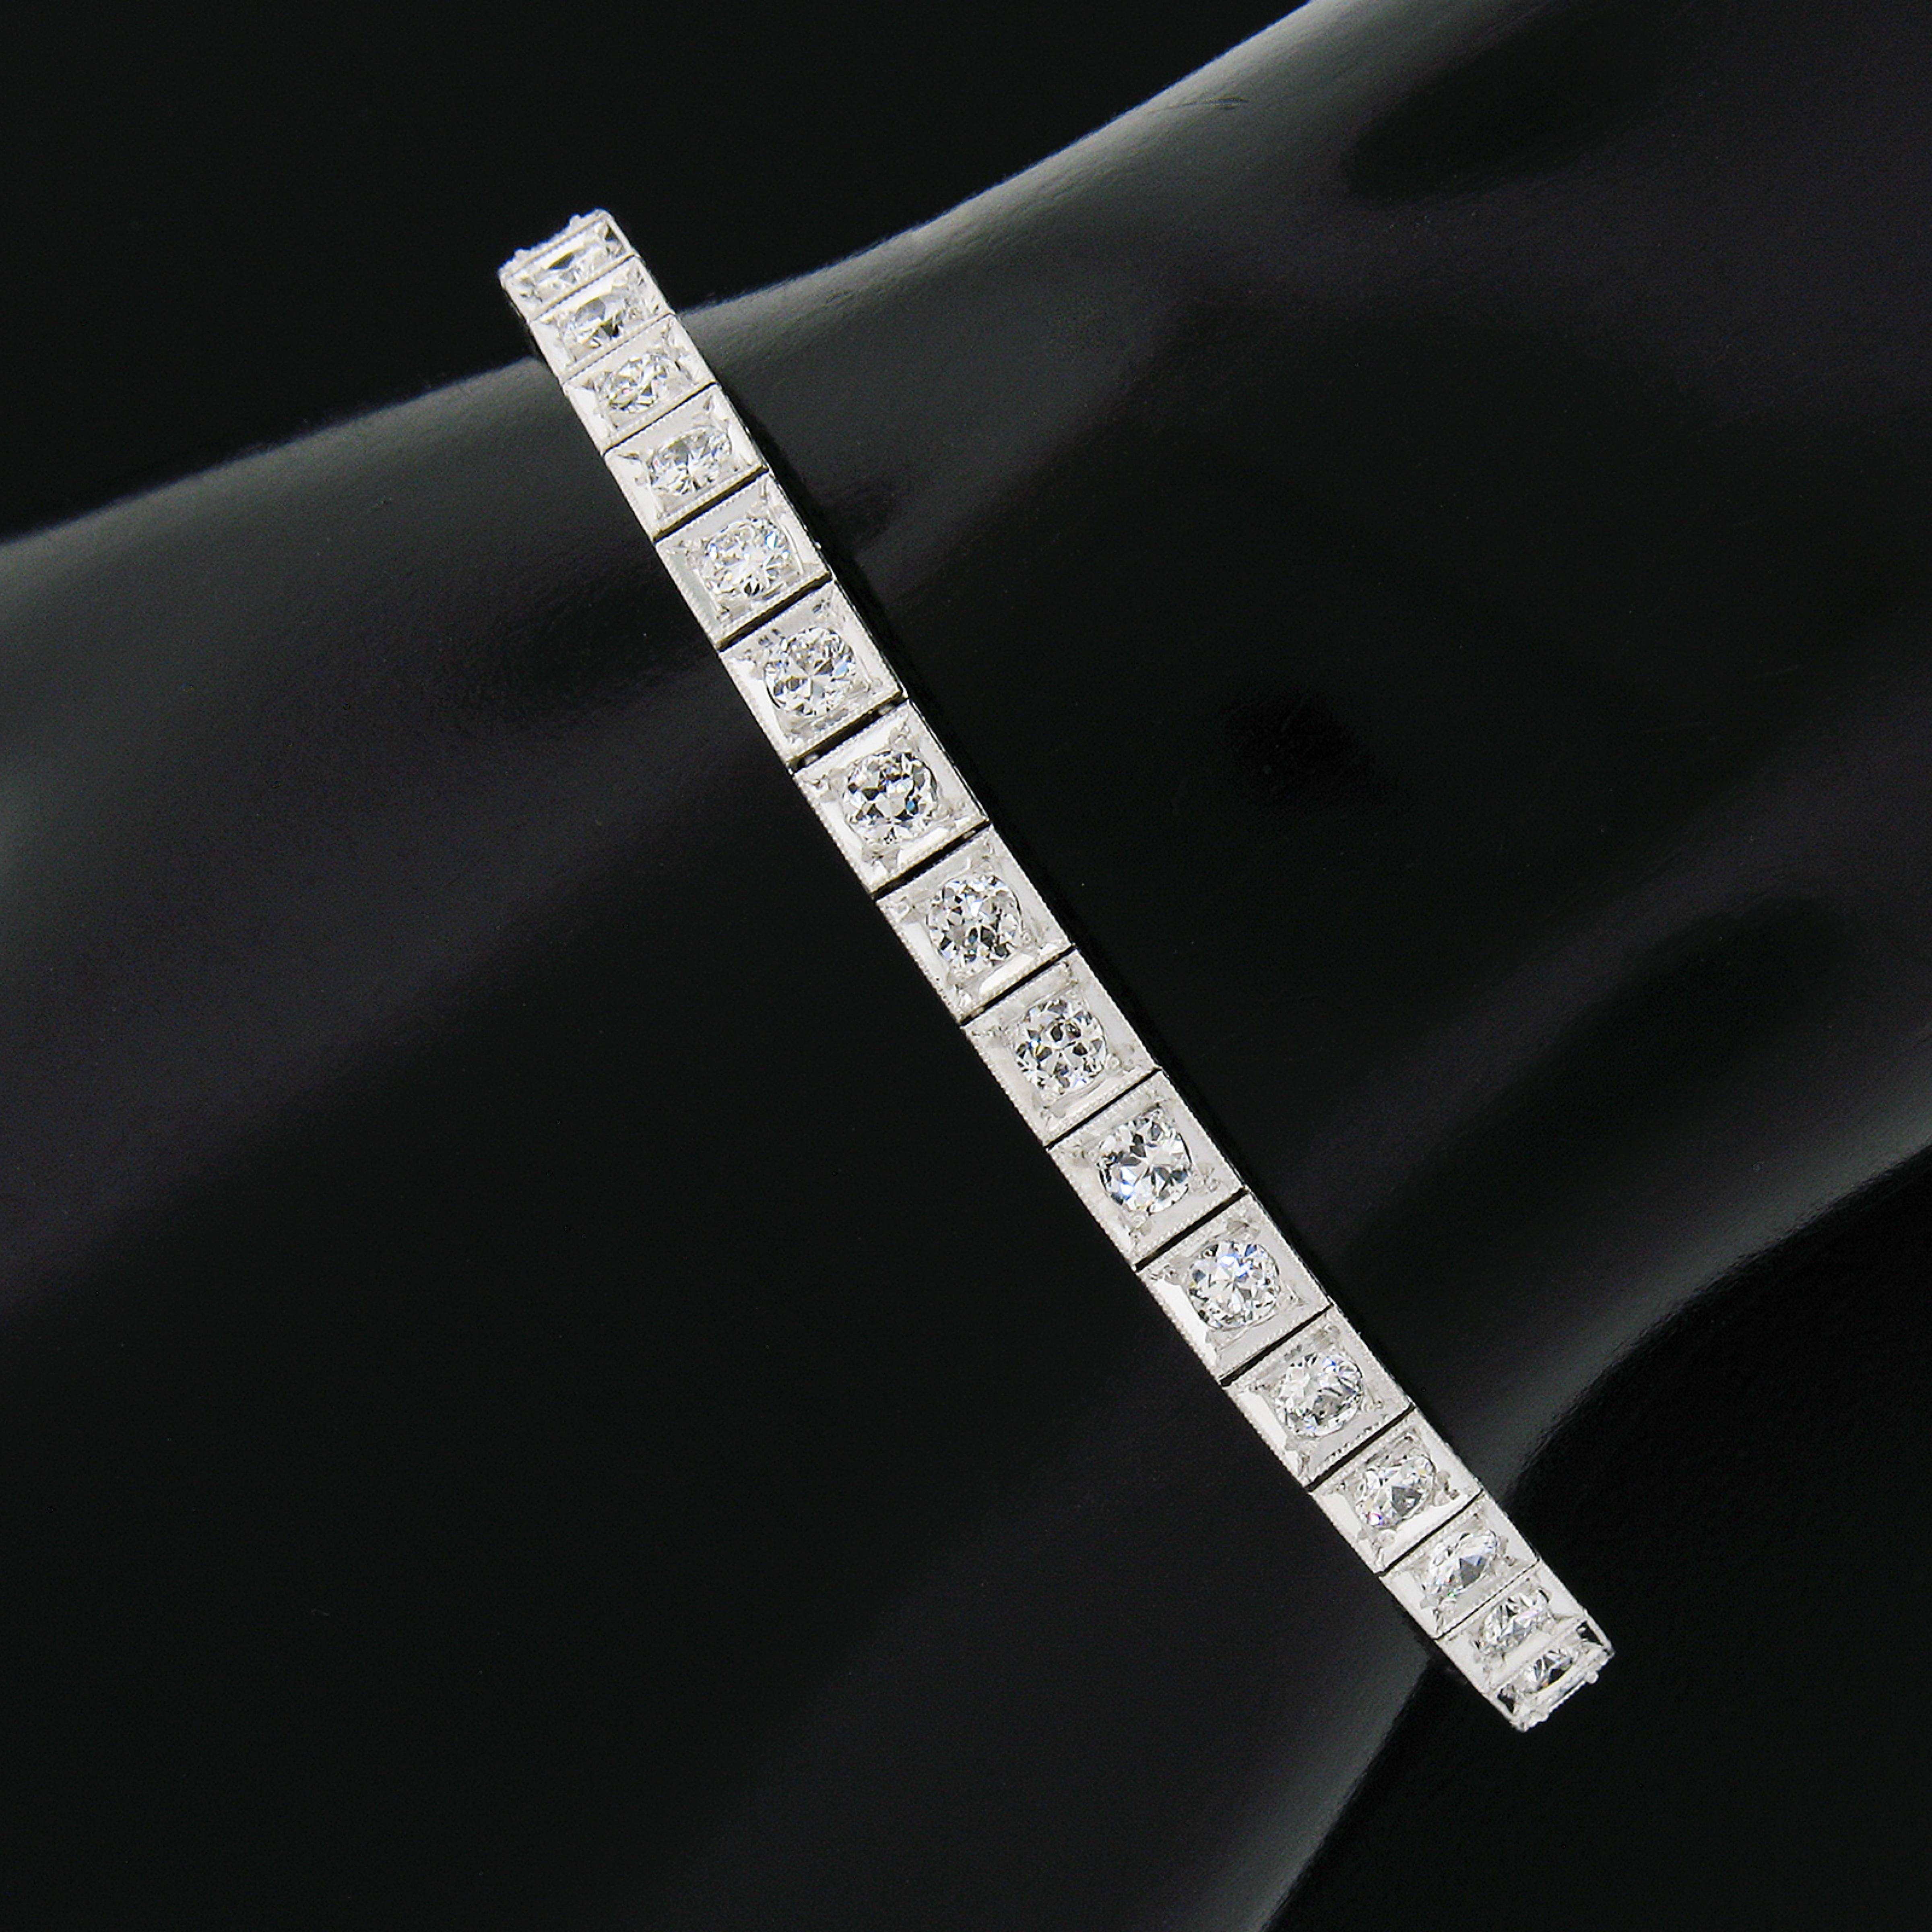 Here we have a magnificent classic antique art deco diamond tennis bracelet. This bracelet is crafted in solid platinum and features 40 old European cut diamonds neatly set in square prong settings and decorated with fine Milgrain etching technique